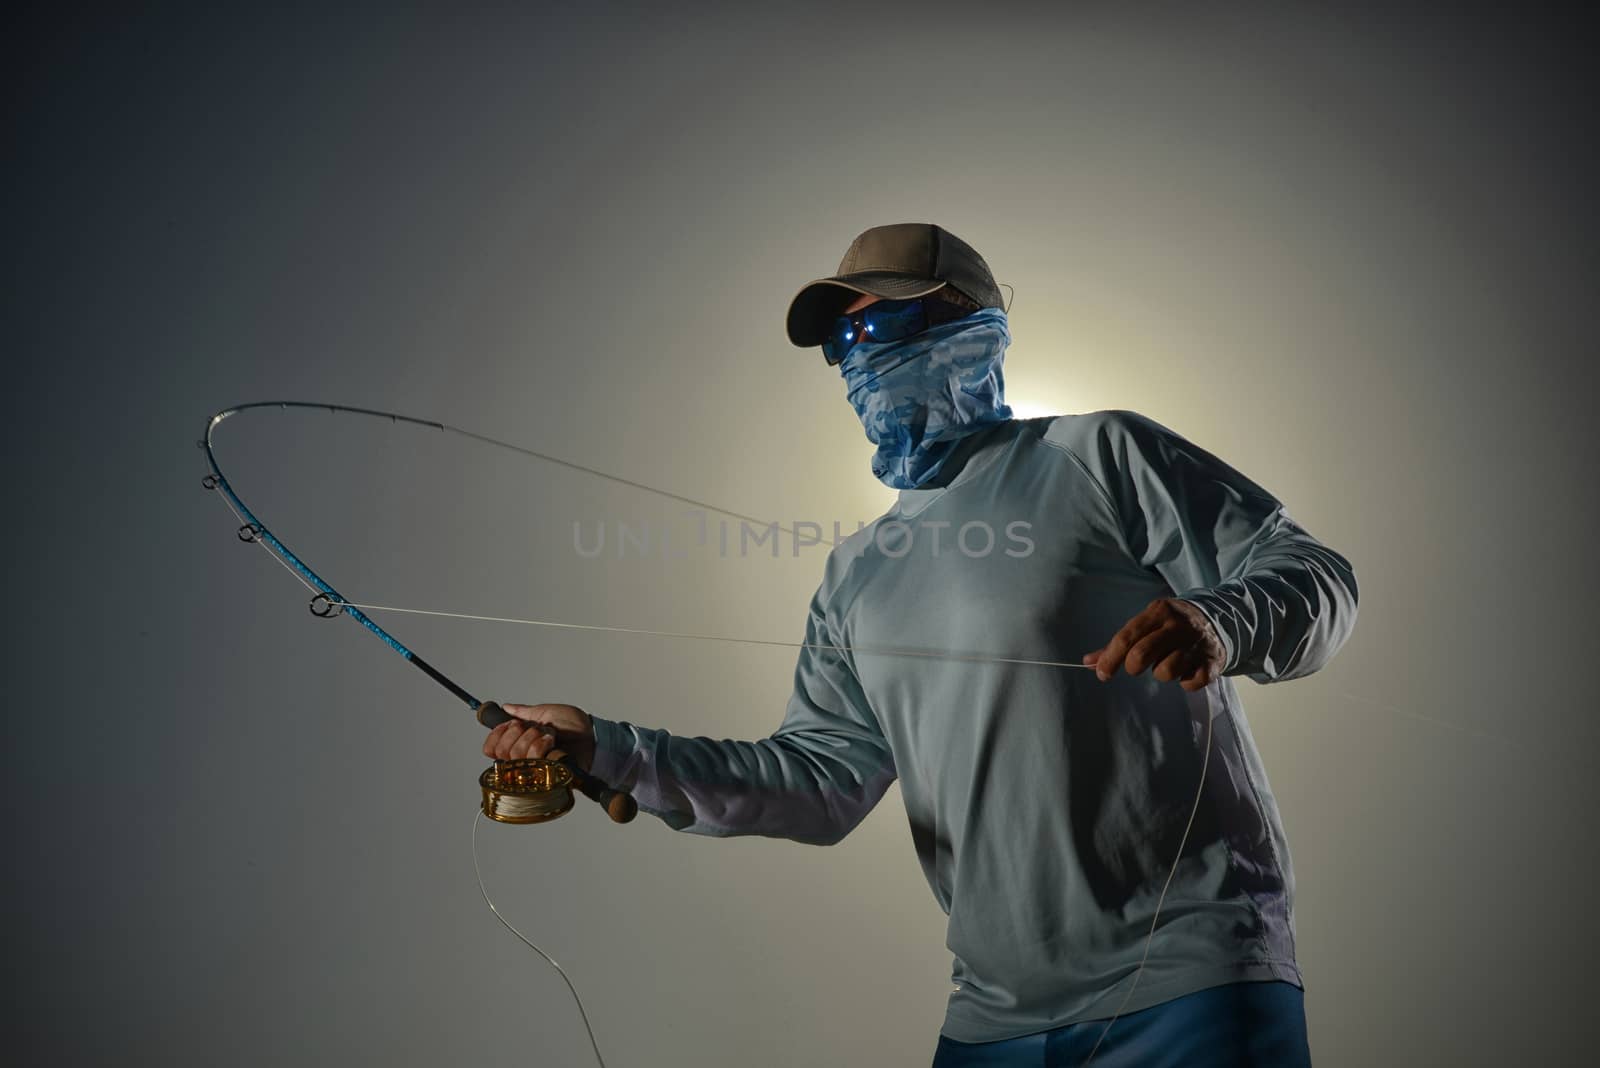 guy casting while fishing against a plain background